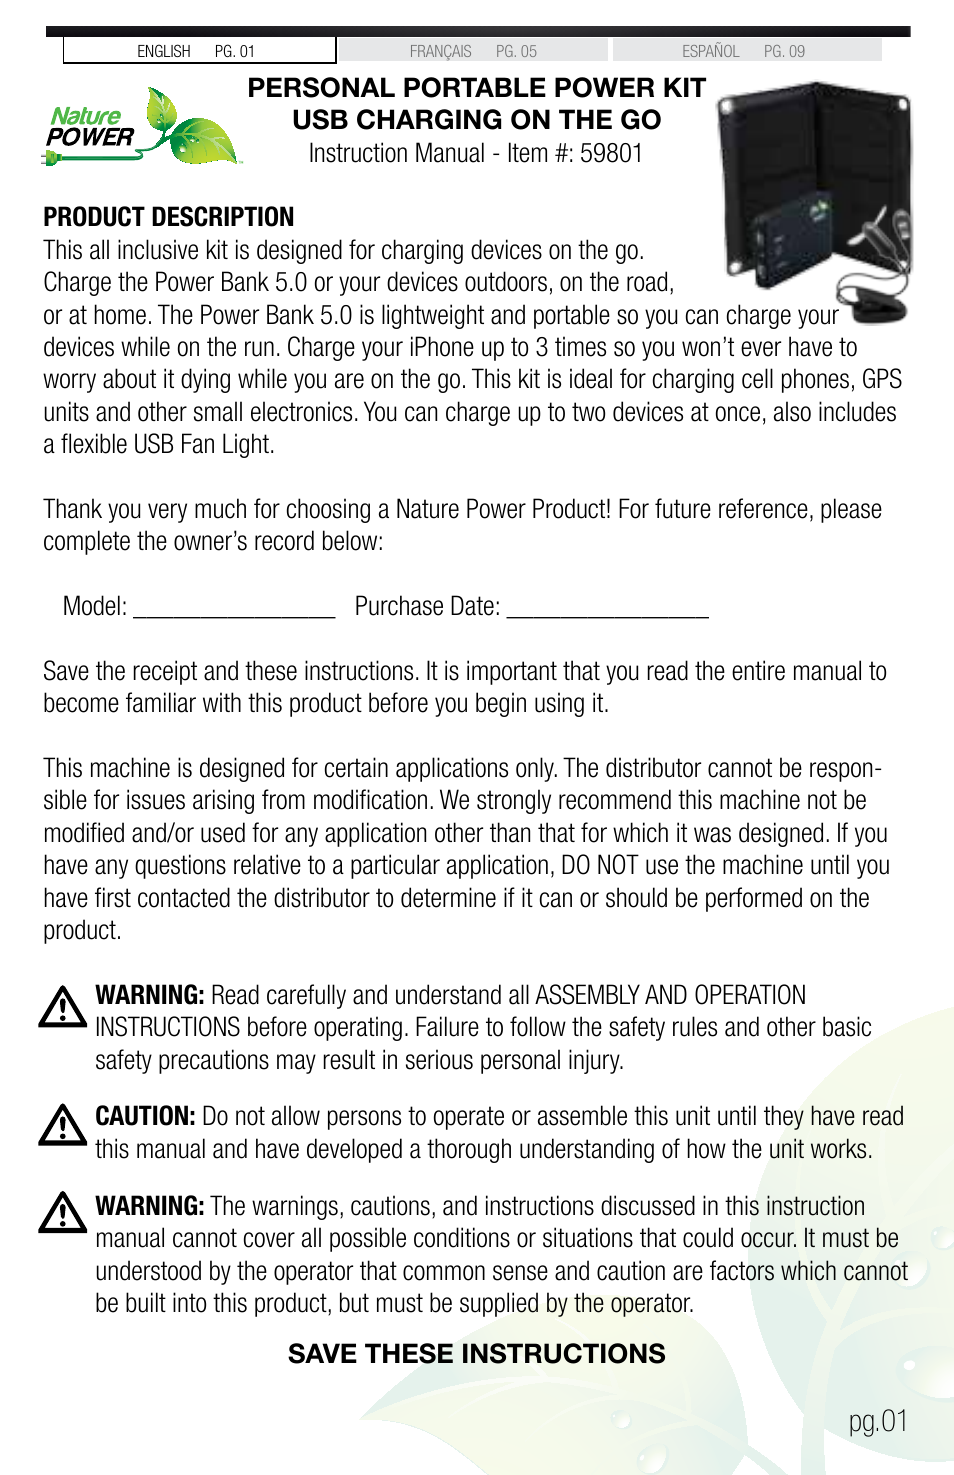 Nature Power PERSONAL PORTABLE POWER KIT USB CHARGING ON THE GO (59801
) User Manual | 12 pages